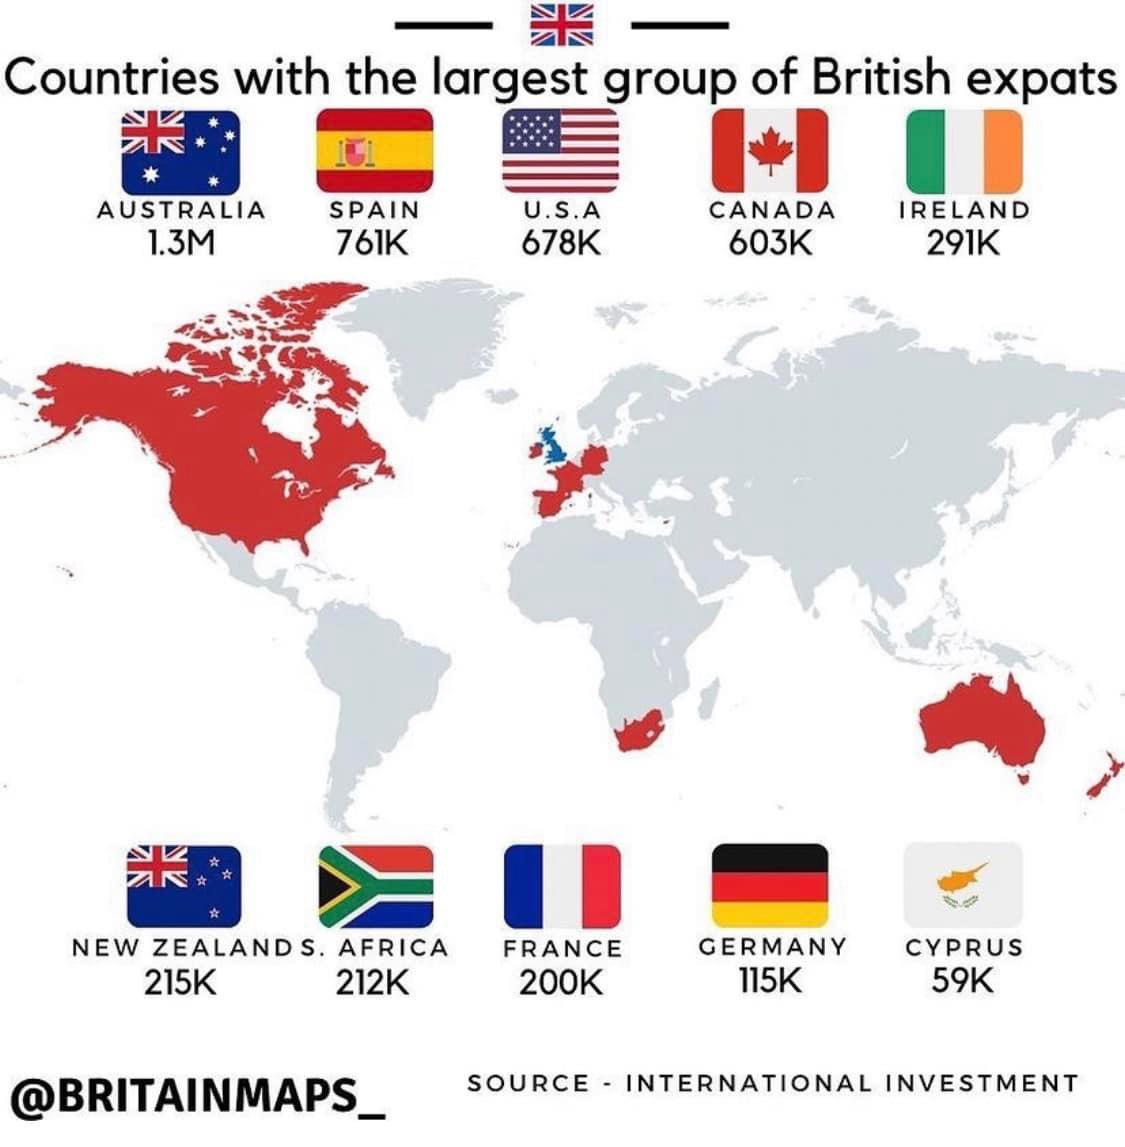 Countries with the largest group of British expats. #CANZUK